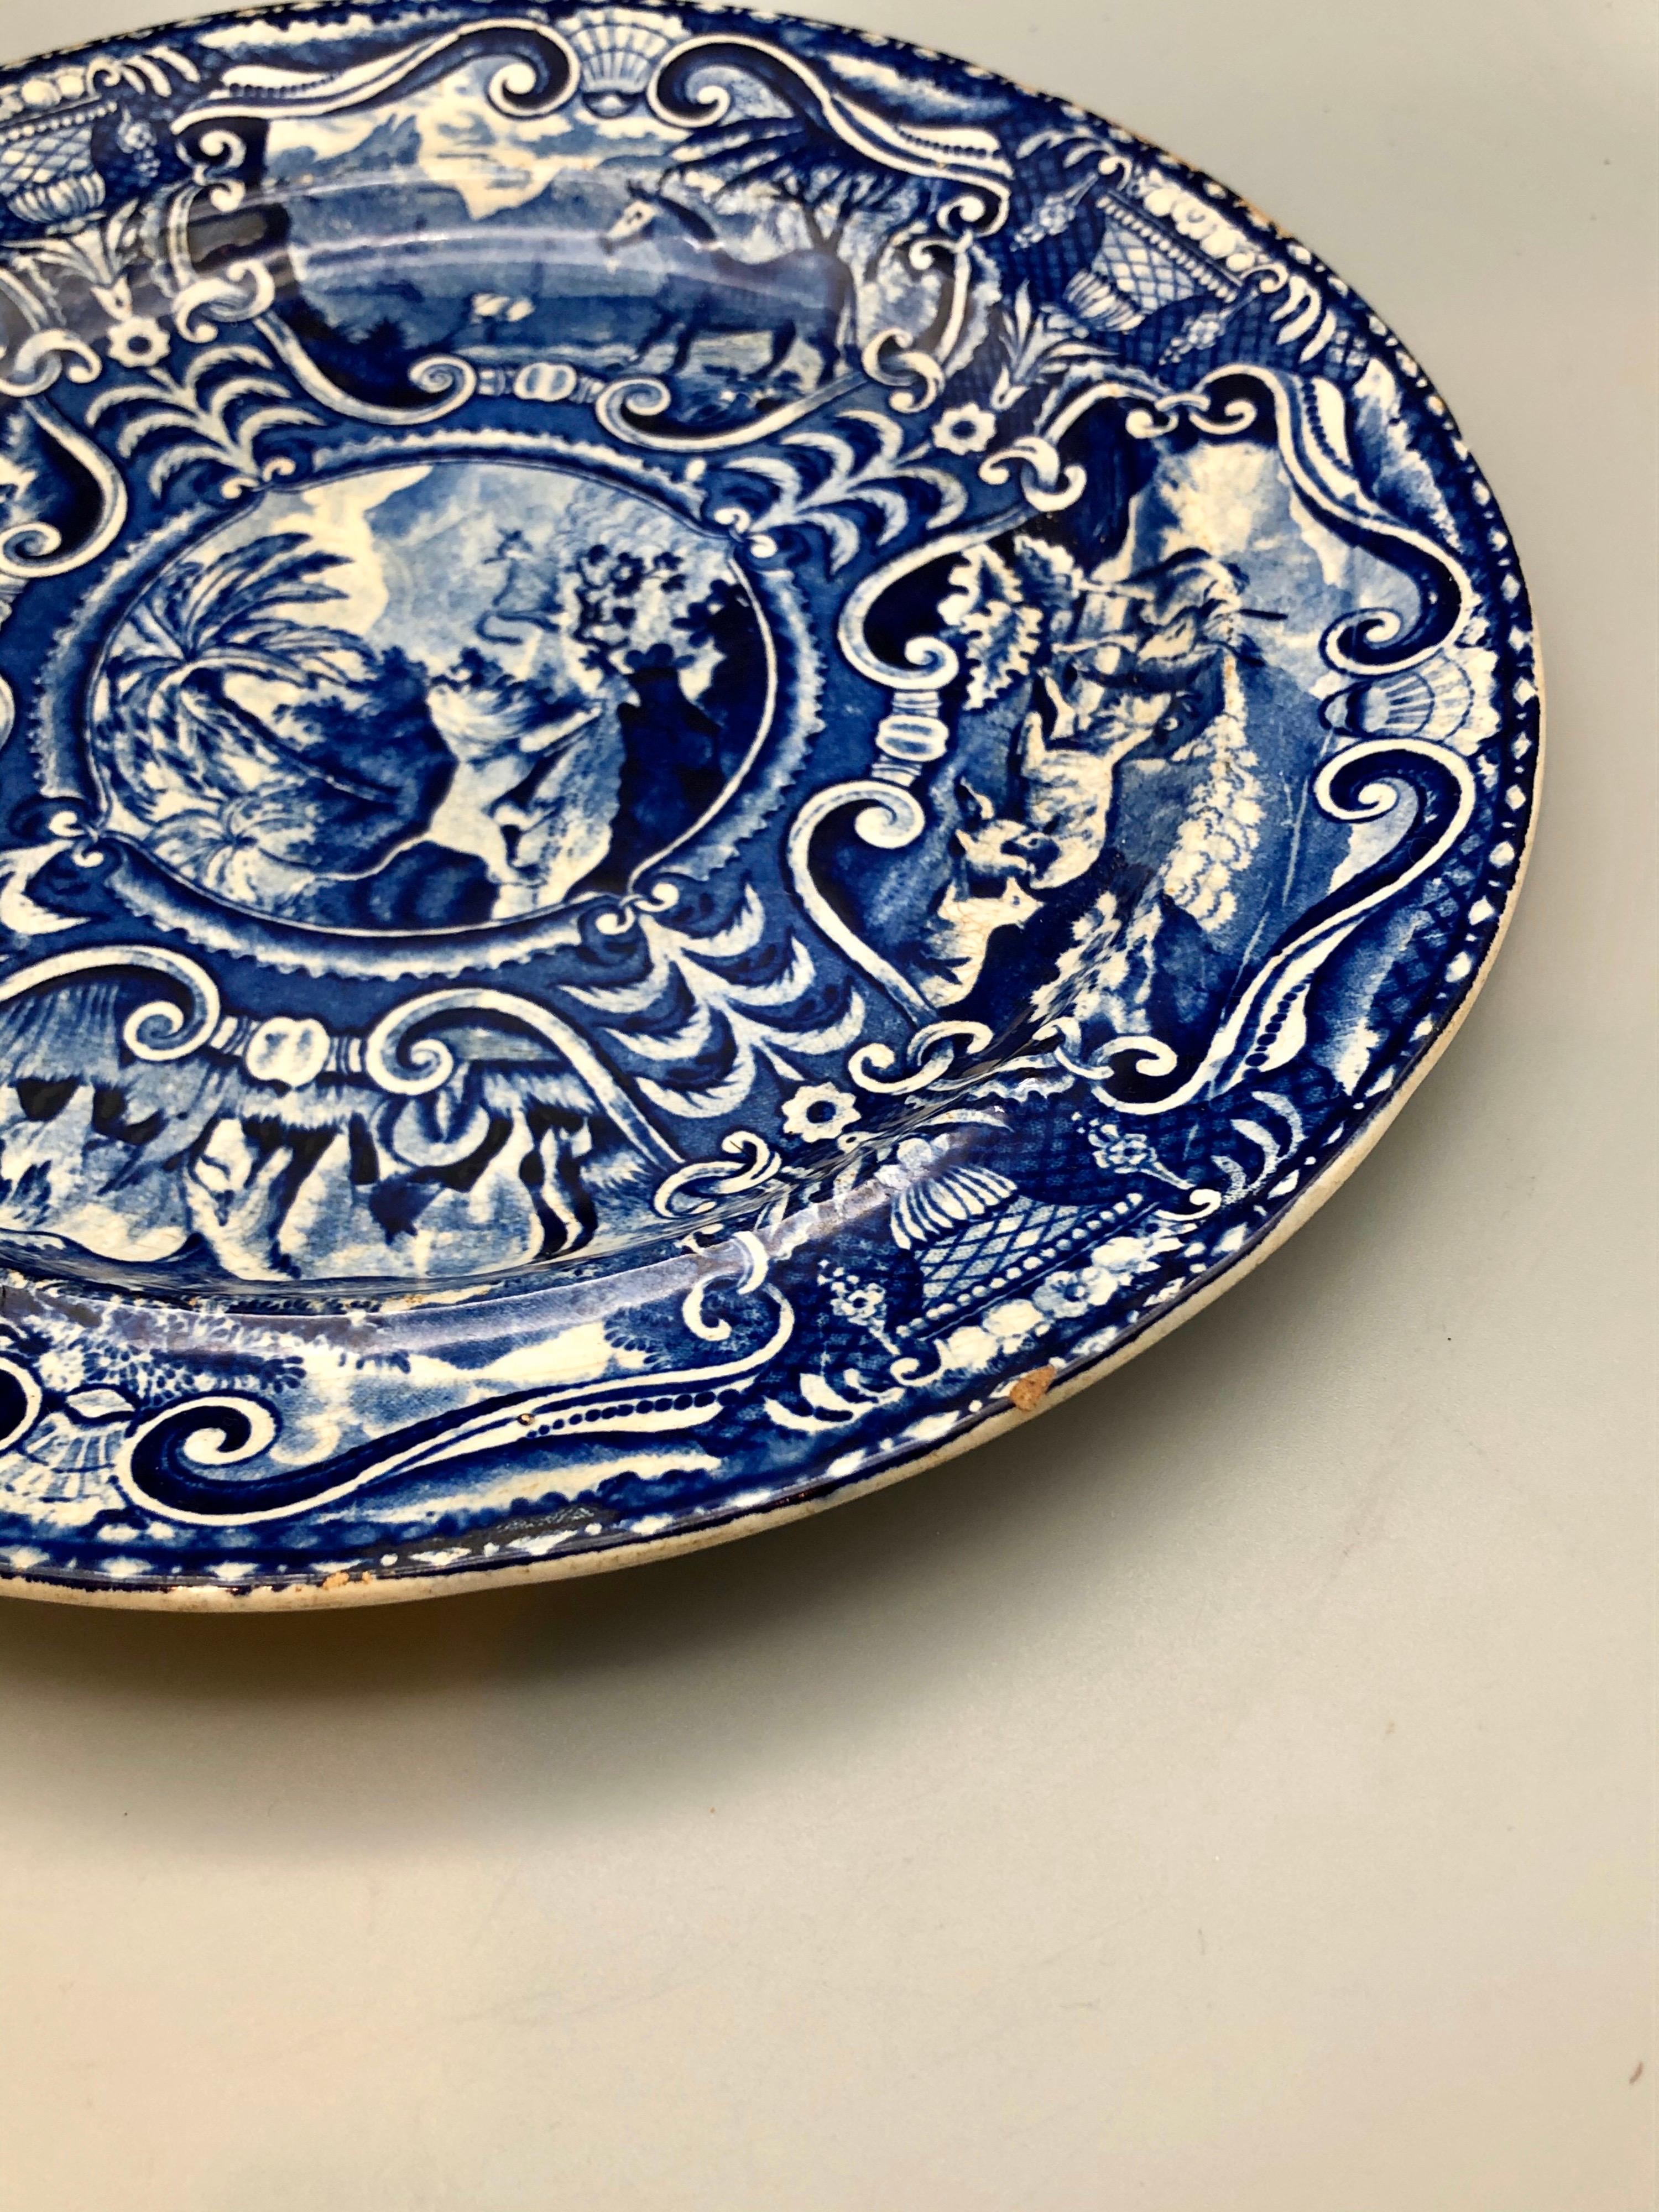 Early 1800s Quadruped Plate Lion Pattern Cobalt Blue and White In Good Condition For Sale In Vineyard Haven, MA